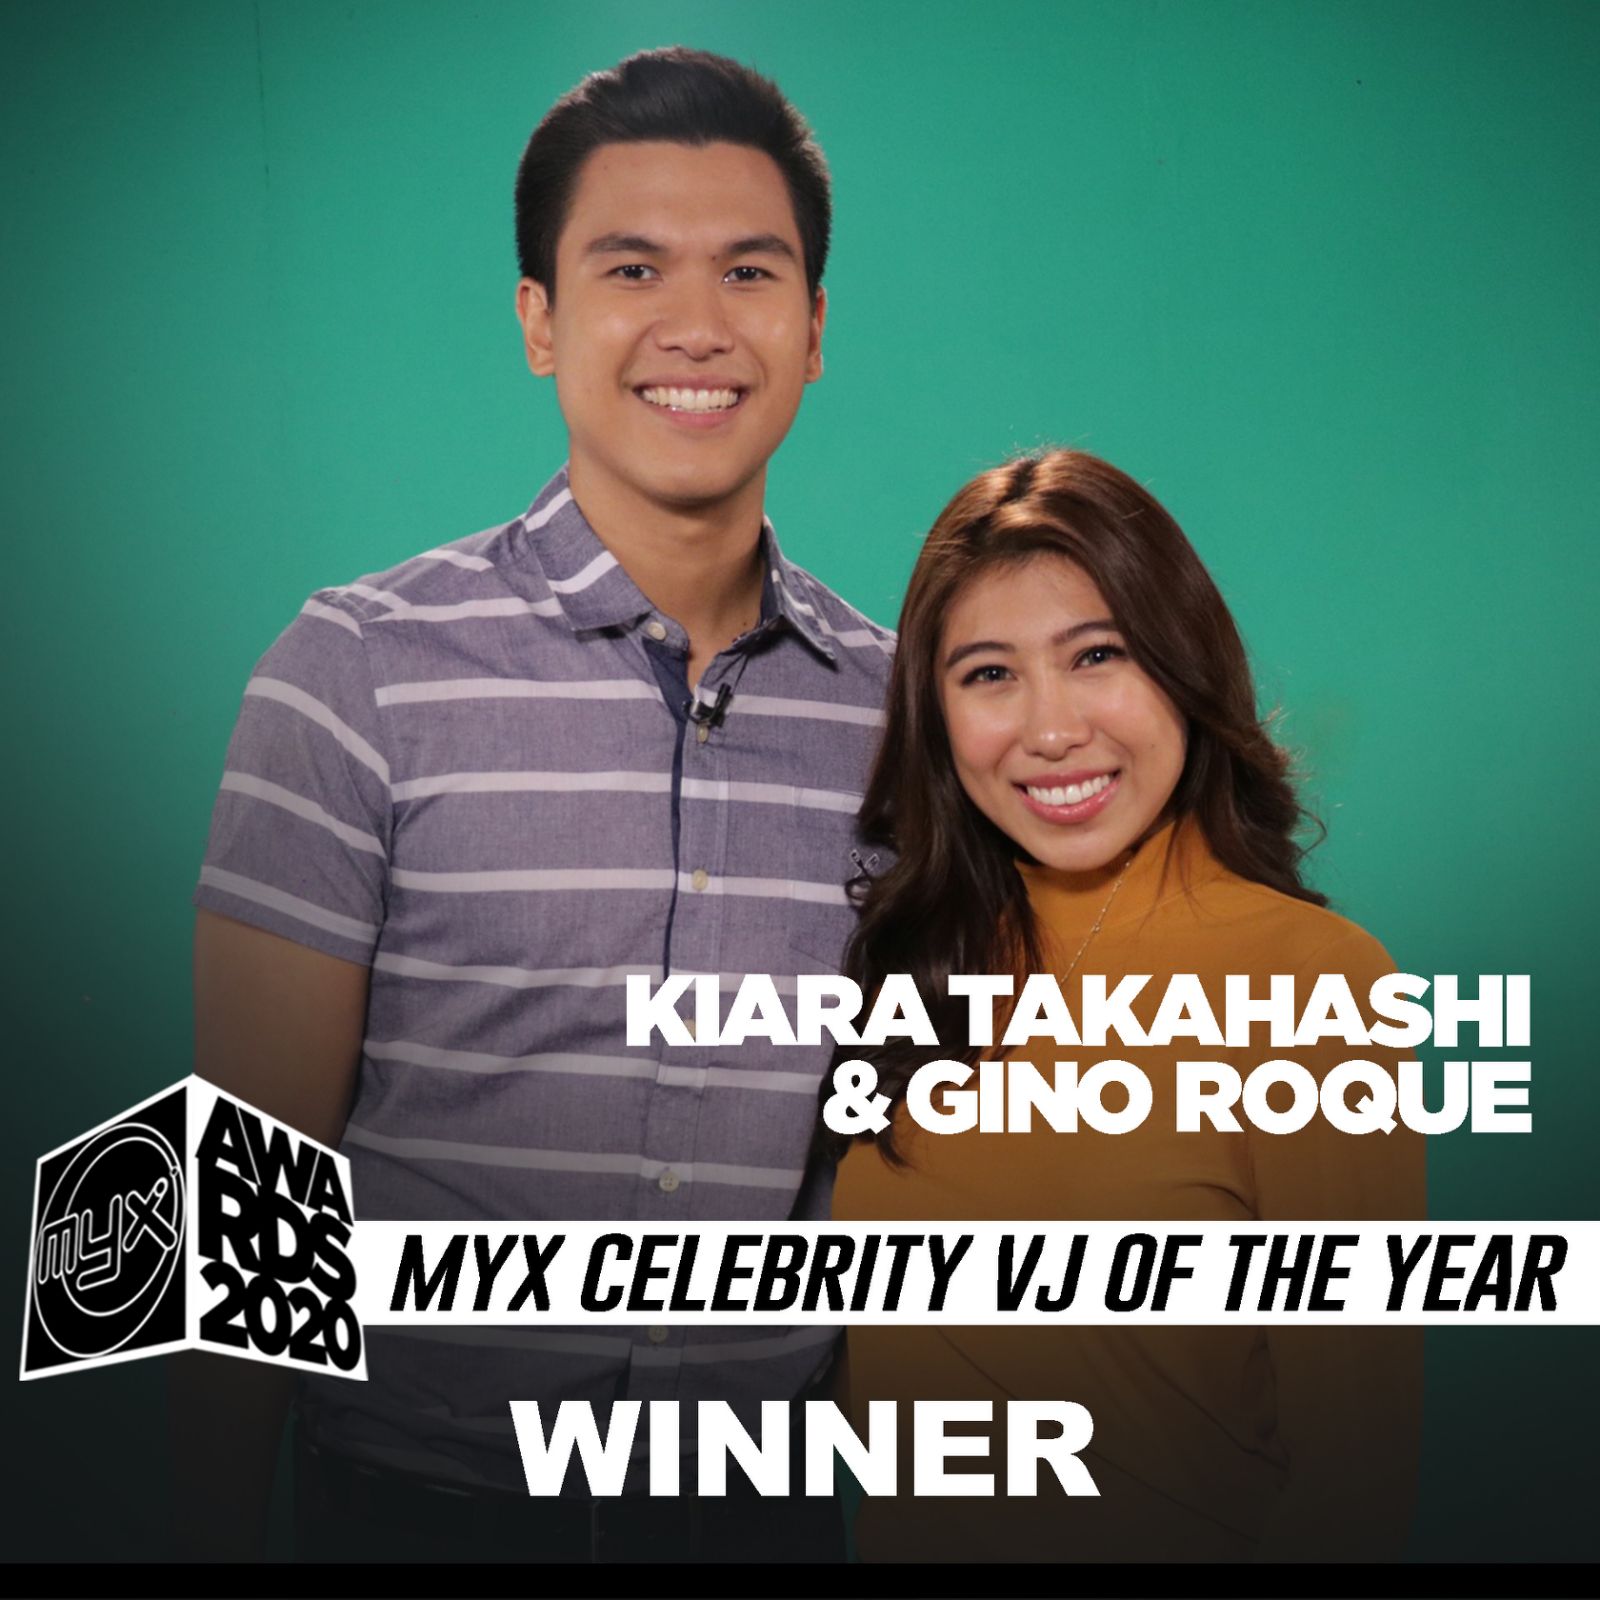 Kiara Takahashi and Gino Roque are named MYX Celebrity VJ of the Year